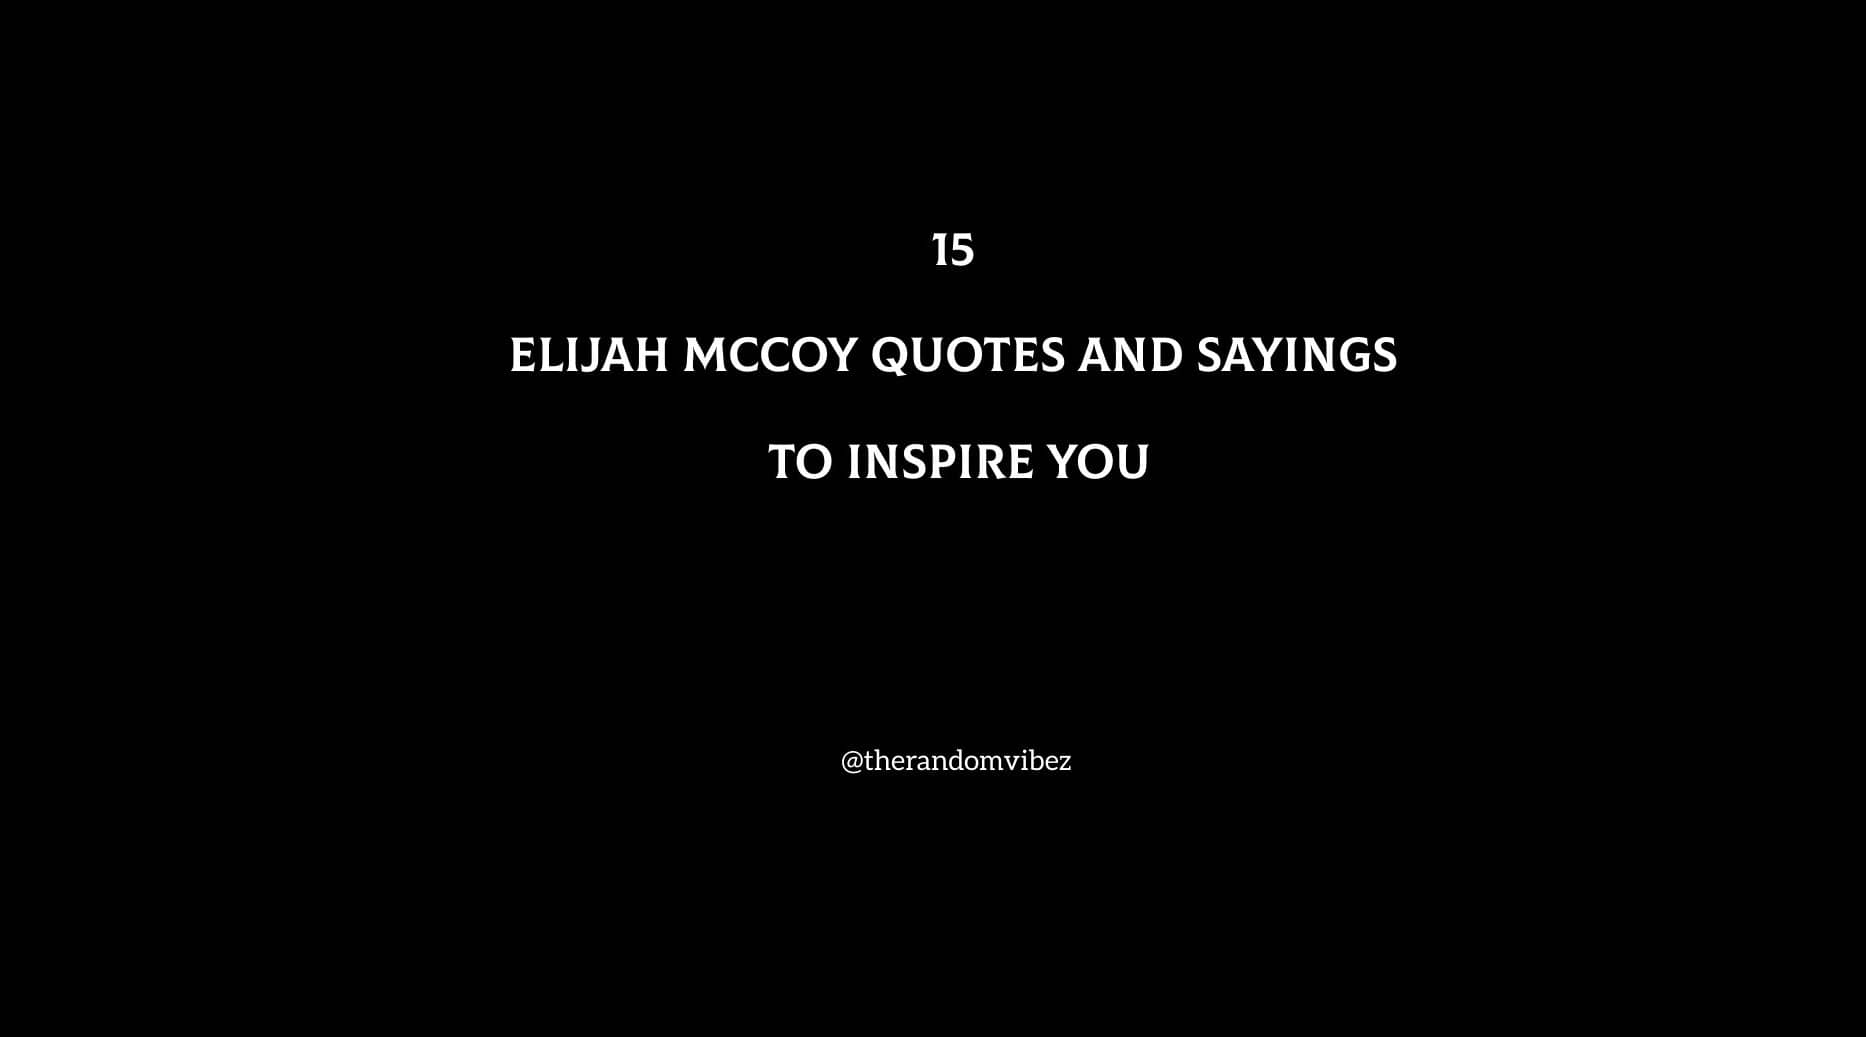 15 Elijah McCoy Quotes And Sayings To Inspire You